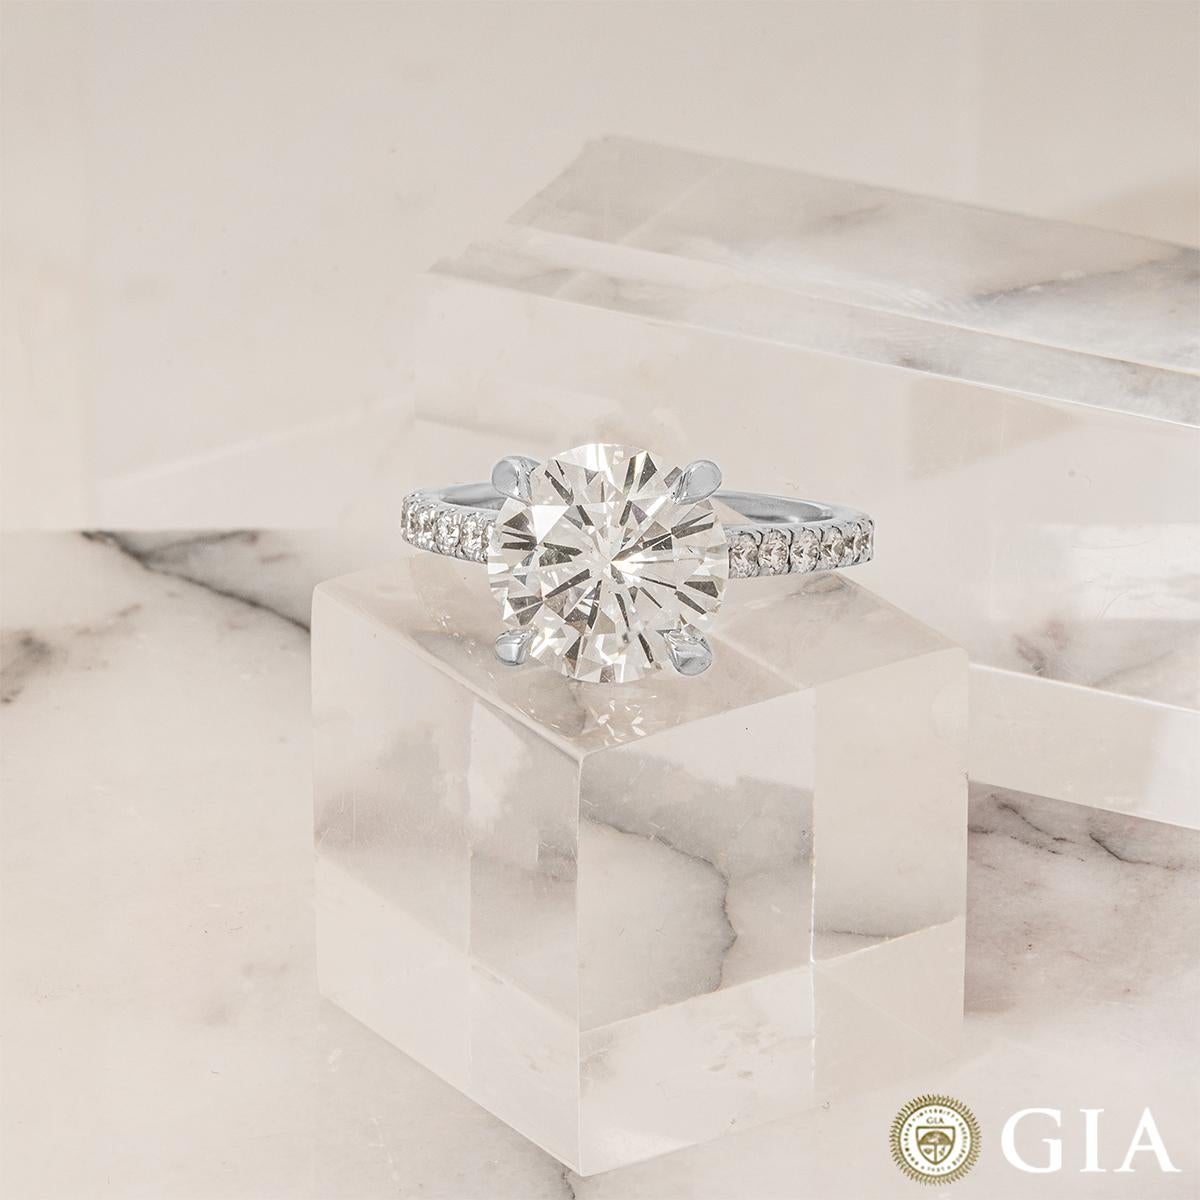 Women's GIA Certified Round Brilliant Cut Diamond Engagement Ring 3.52ct K/SI1